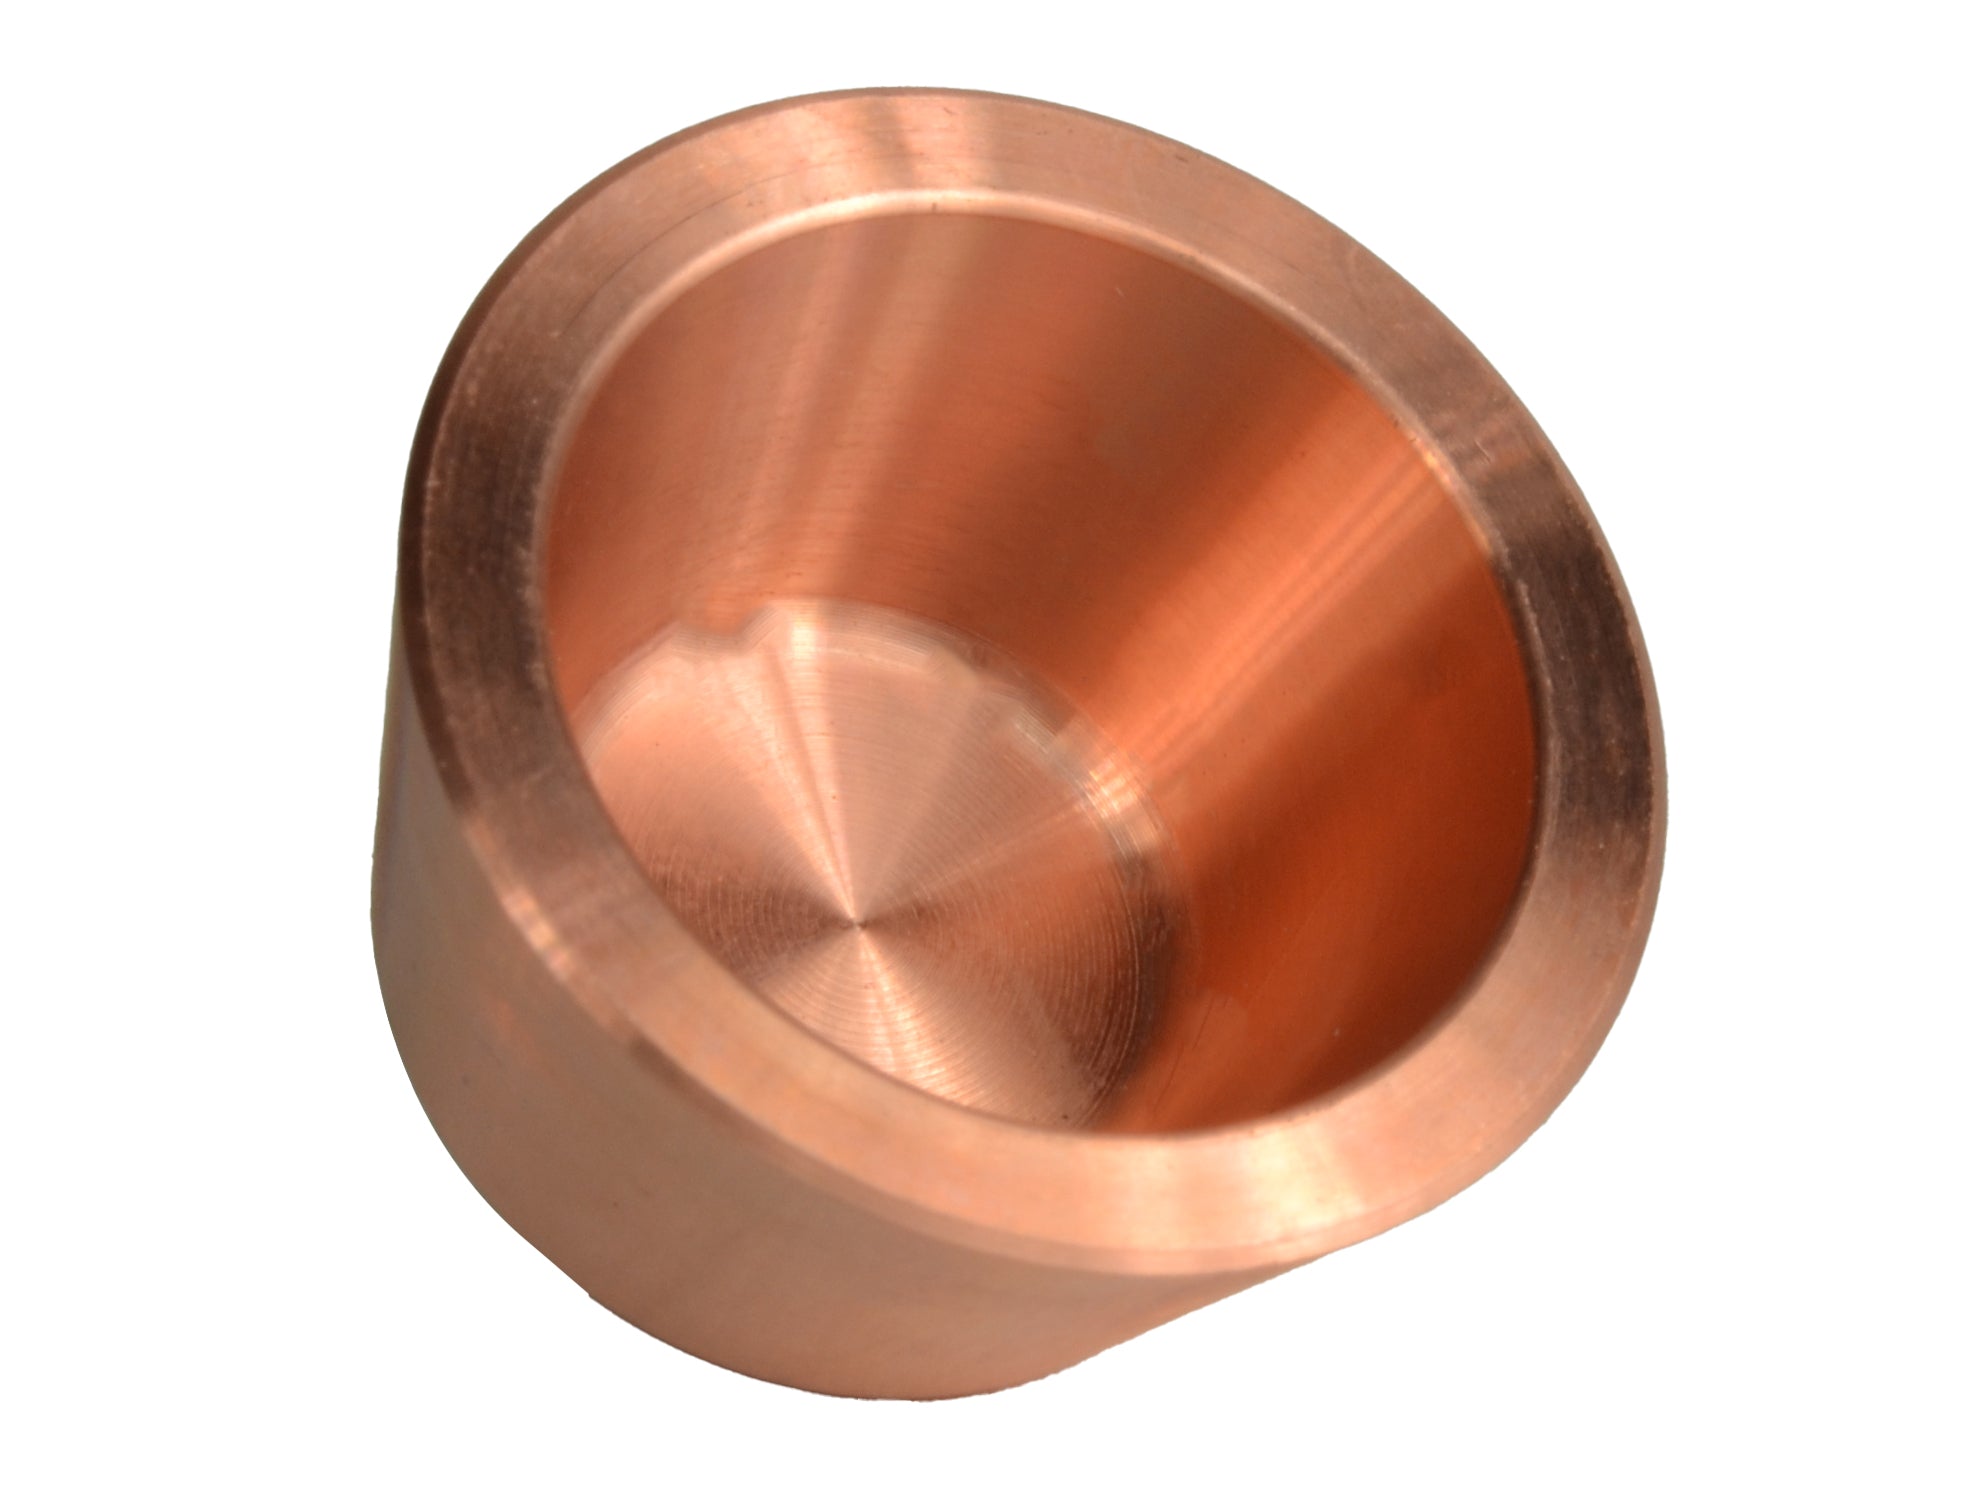 High Purity Copper Manufacturers and Suppliers in the USA